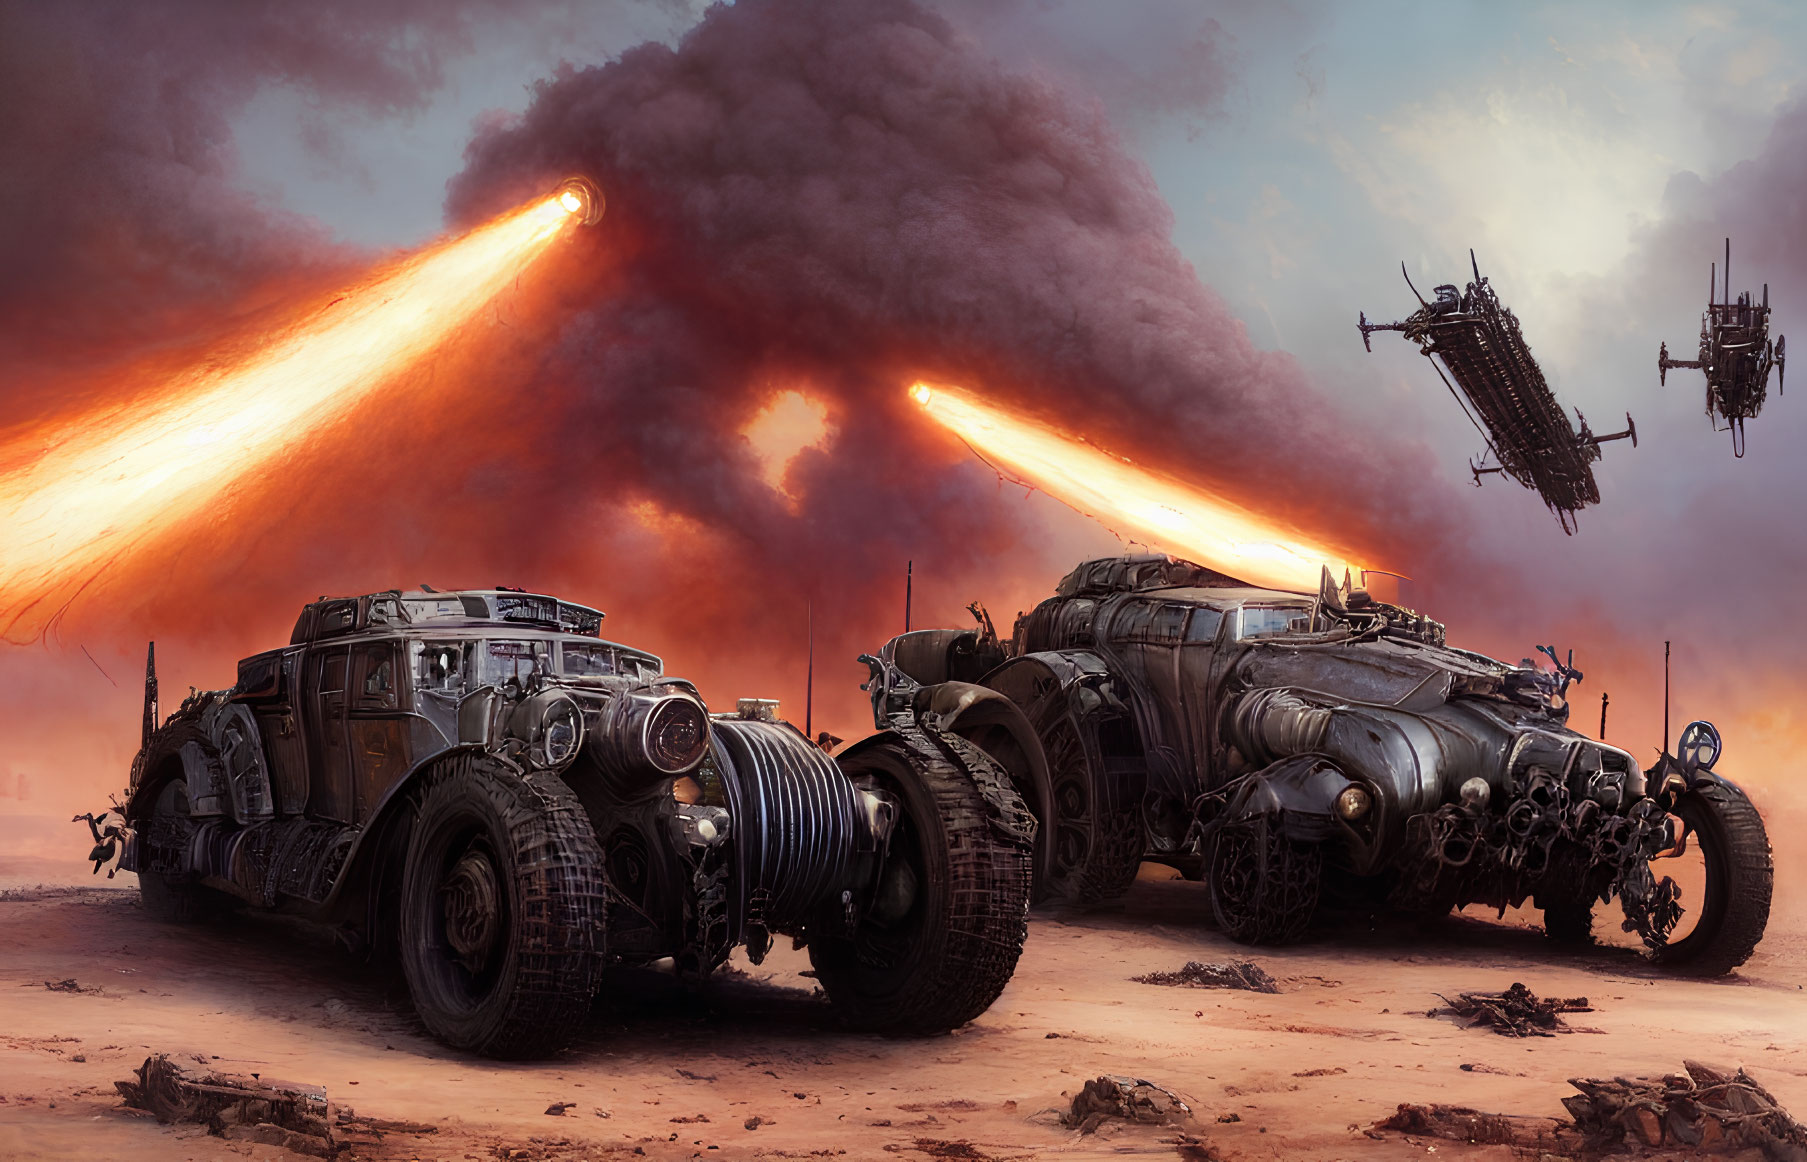 Dystopian battlefield with armored vehicles, explosions, and futuristic aircraft